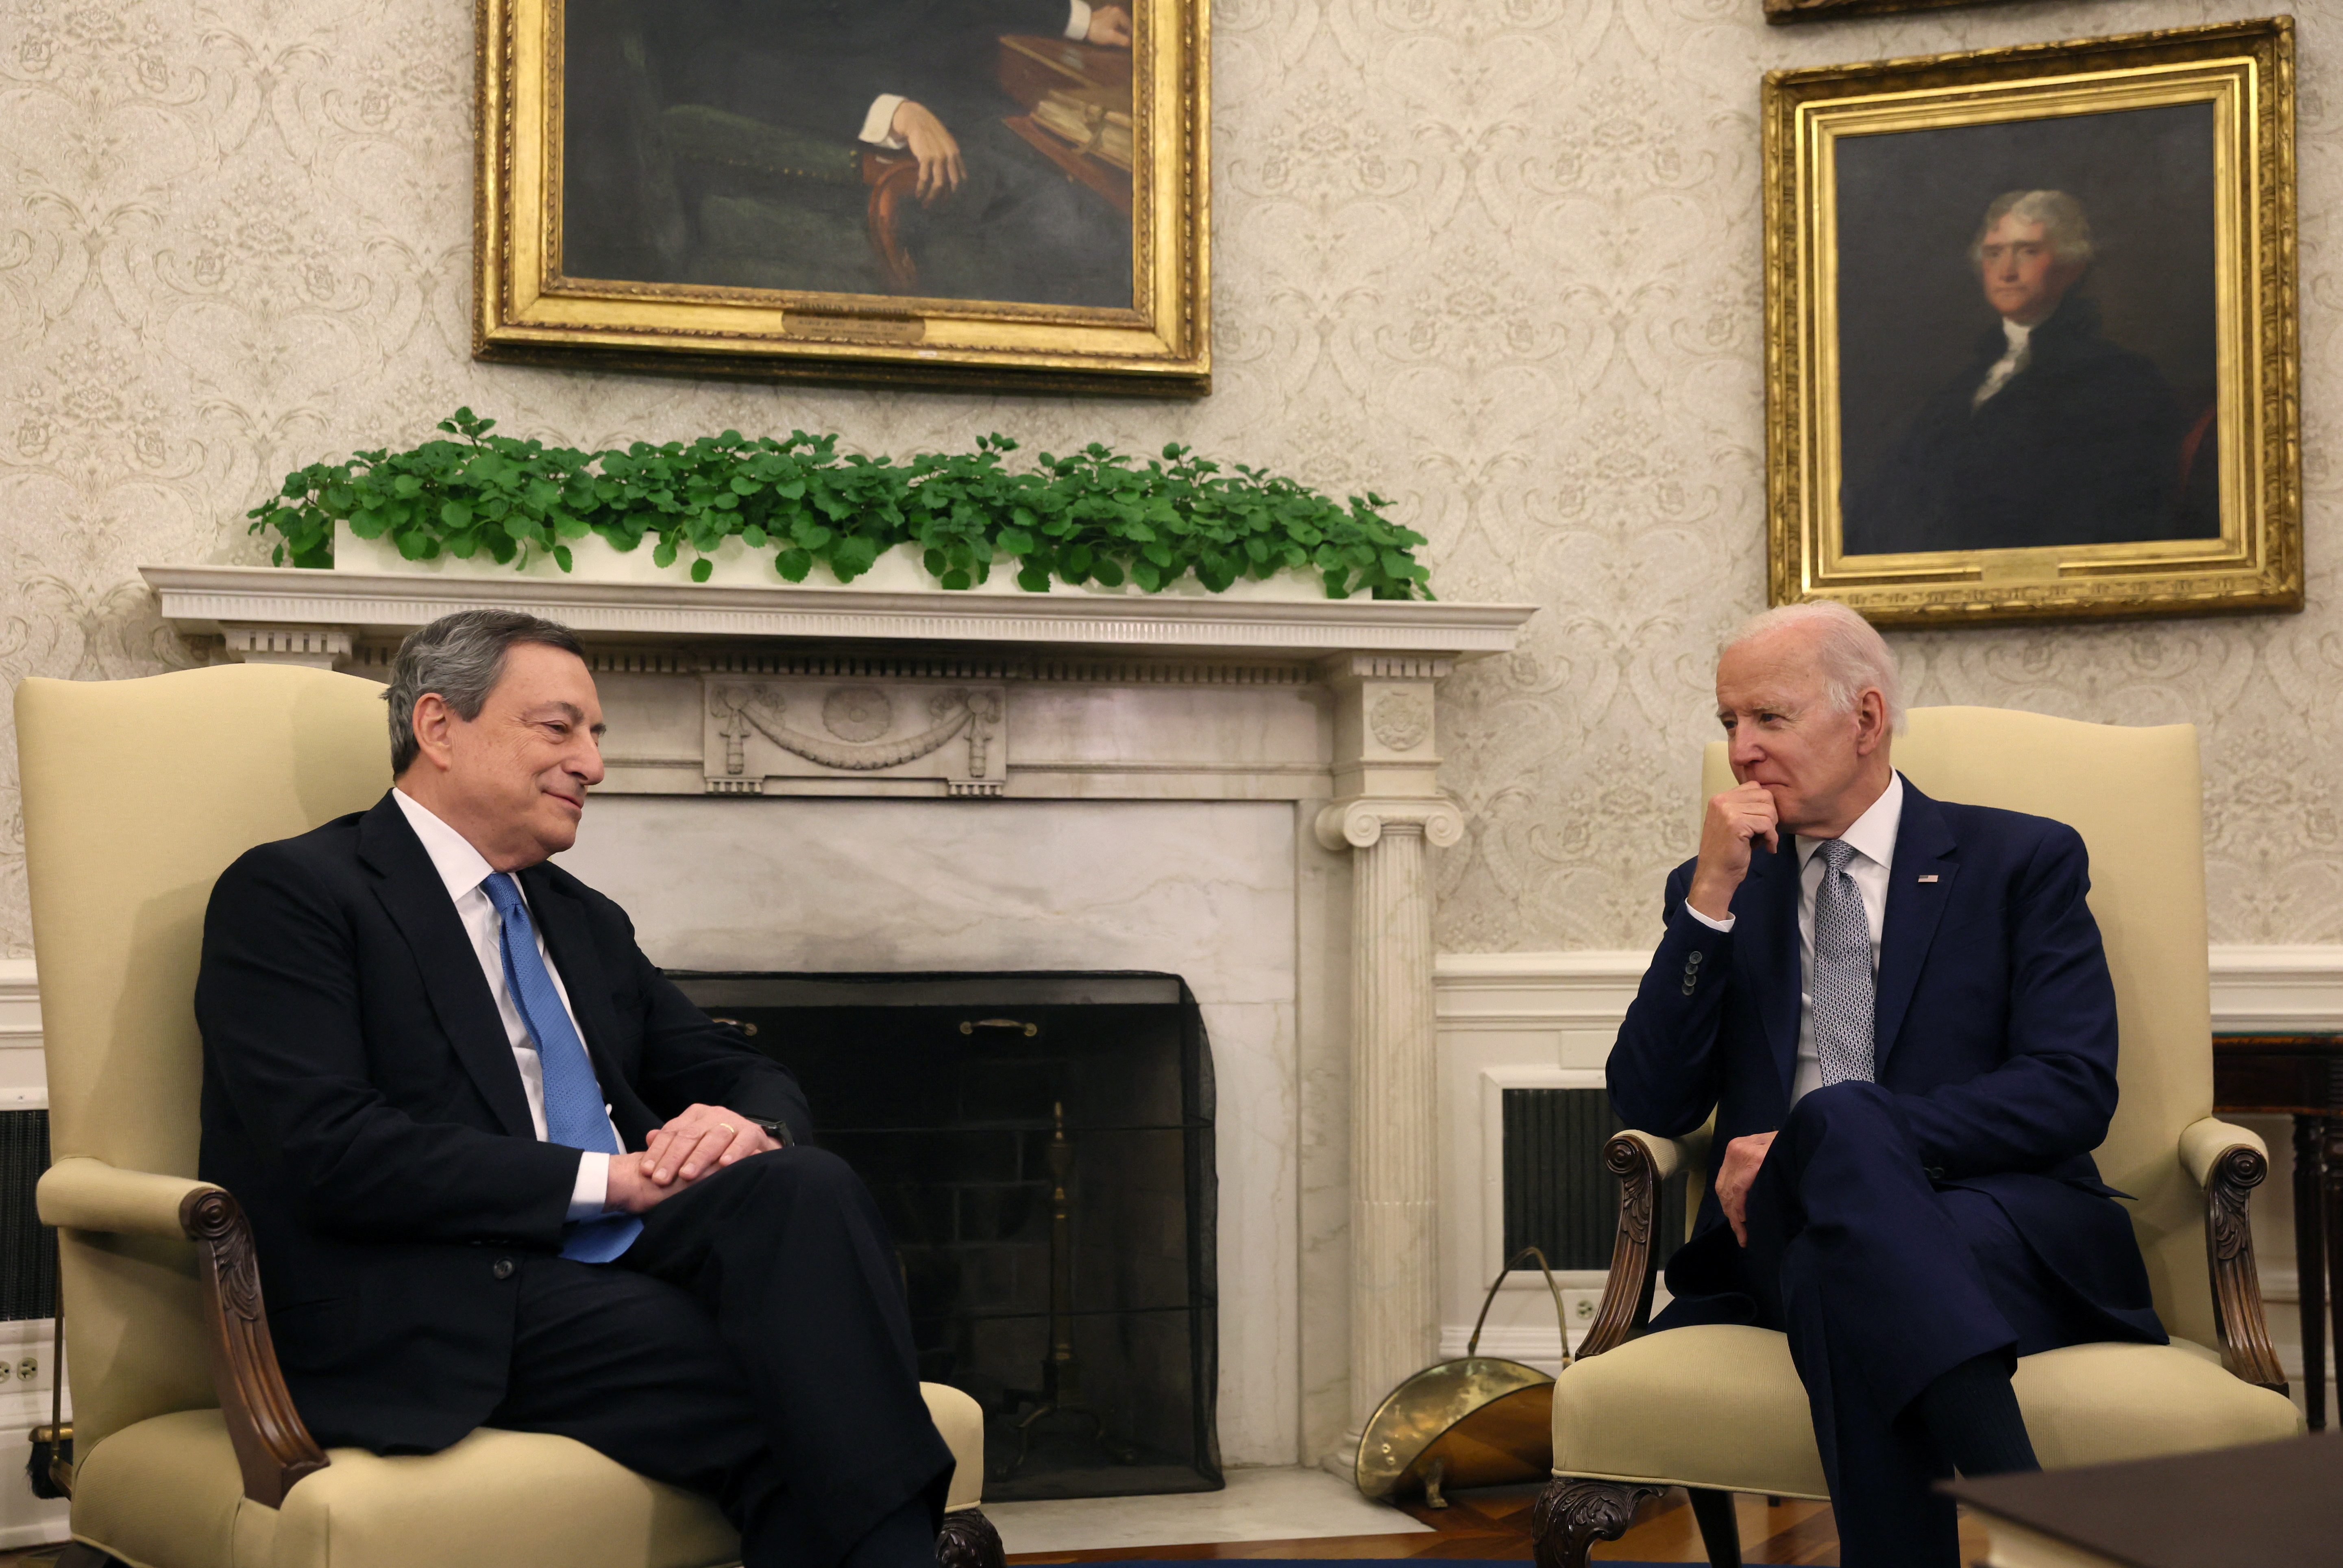 U.S. President Biden meets with Italy's Prime Minister Draghi at the White House in Washington